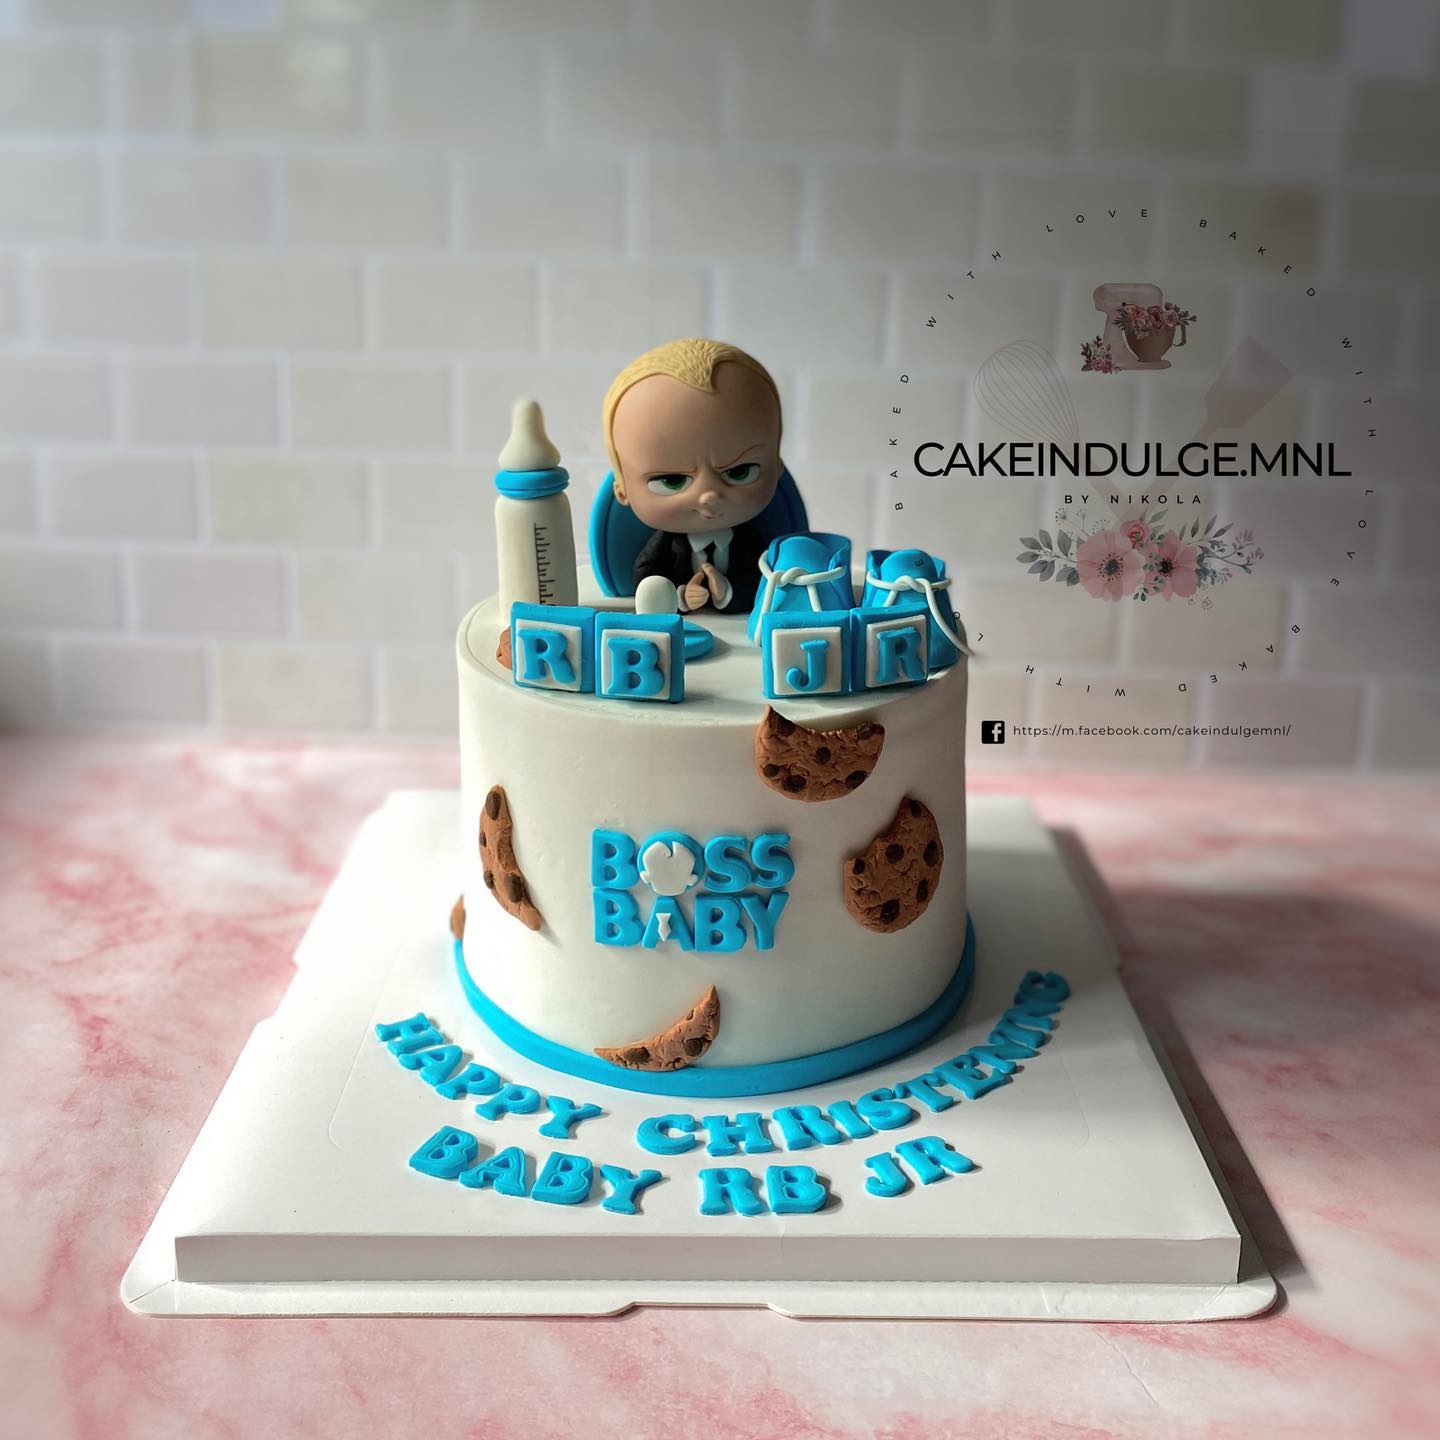 Boss Baby Cake – French Cakes